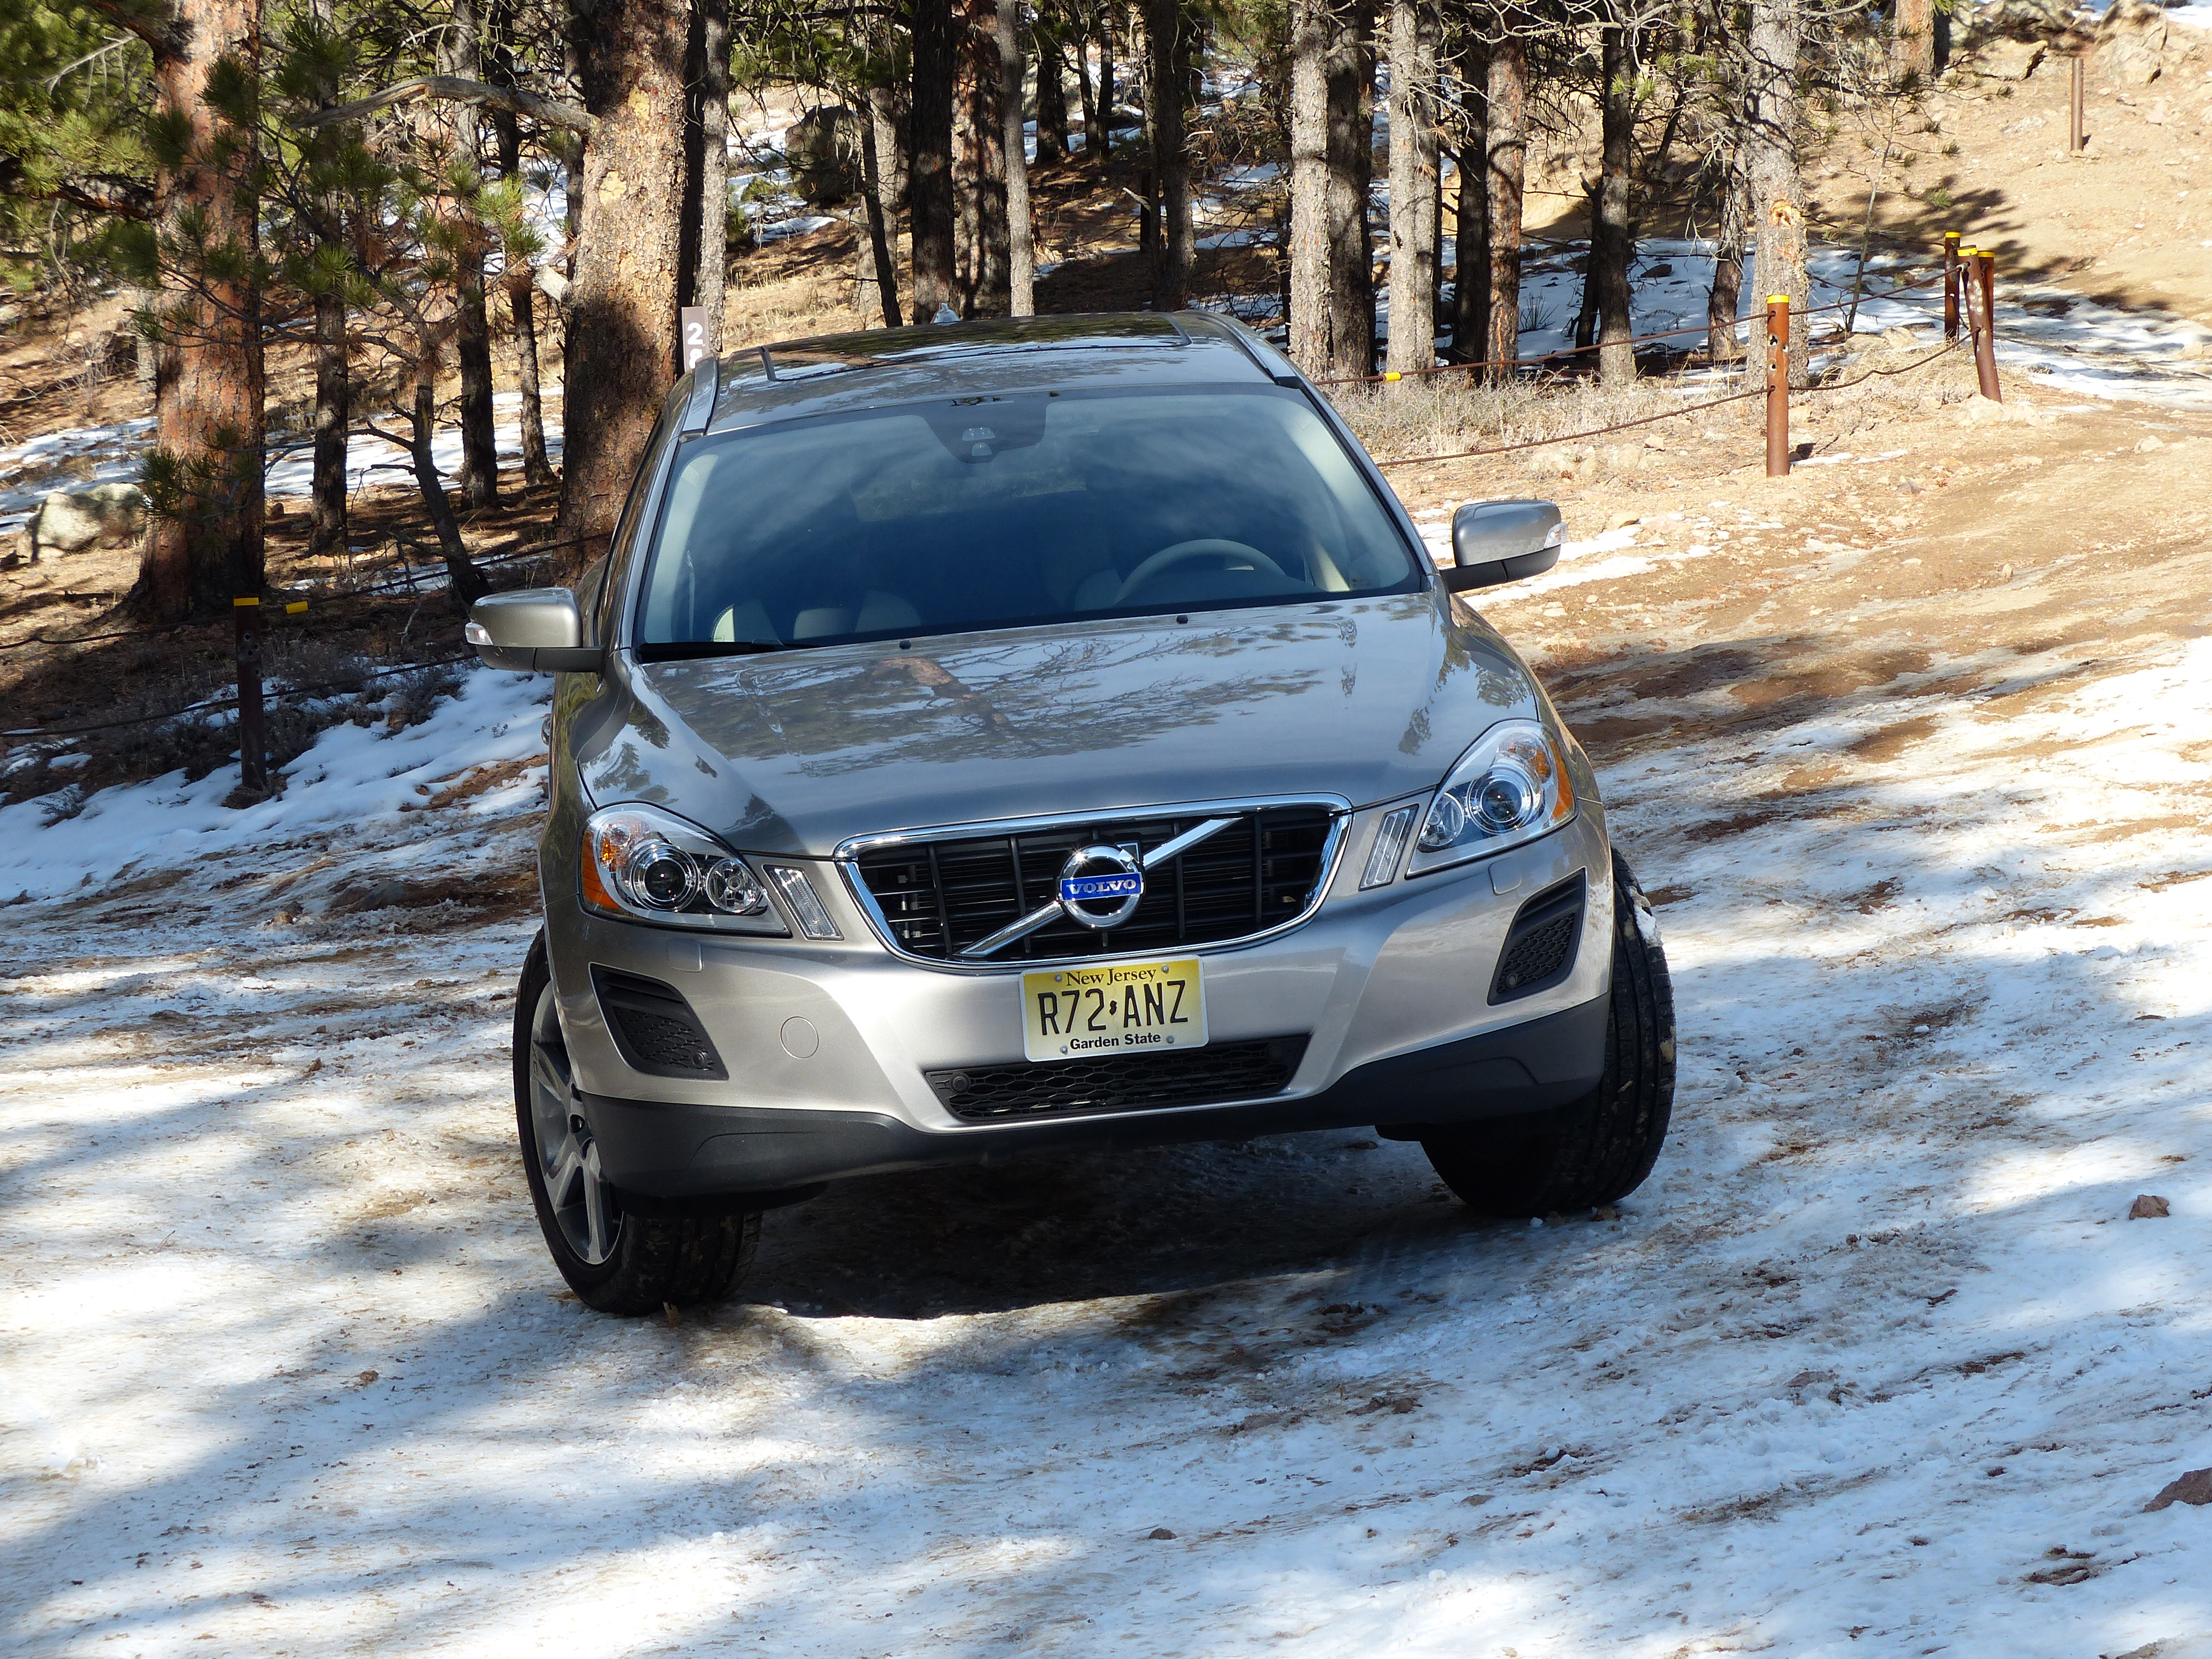 2013 Volvo Xc60 T6 Awd Colorado Mountain Off Road Drive Review